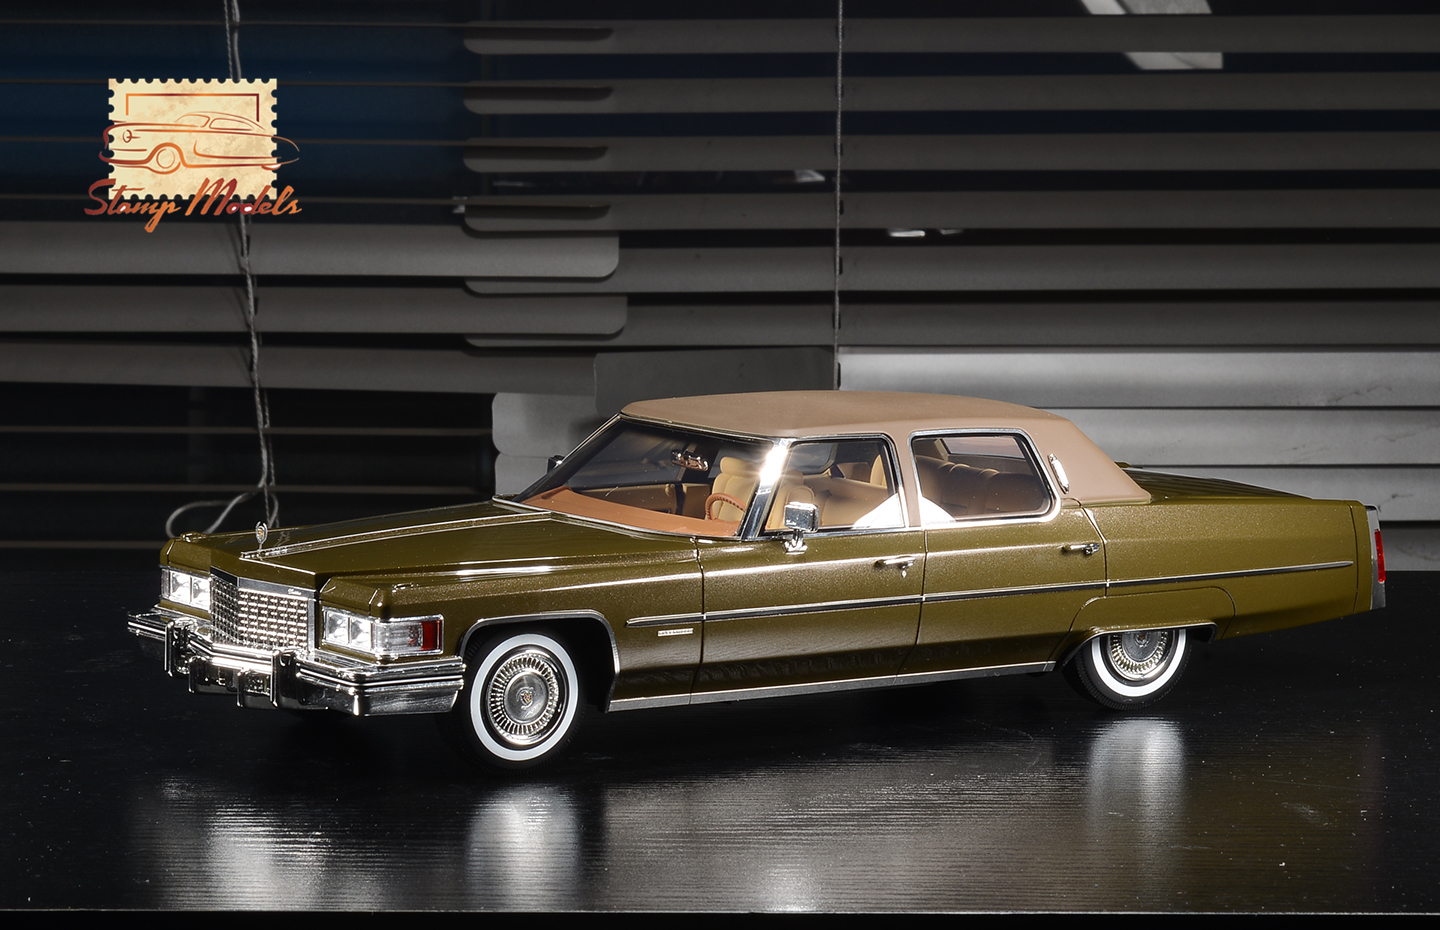 STM1976202 1976 Cadillac Fleetwood Sixty Special Brougham 1/18 Scale